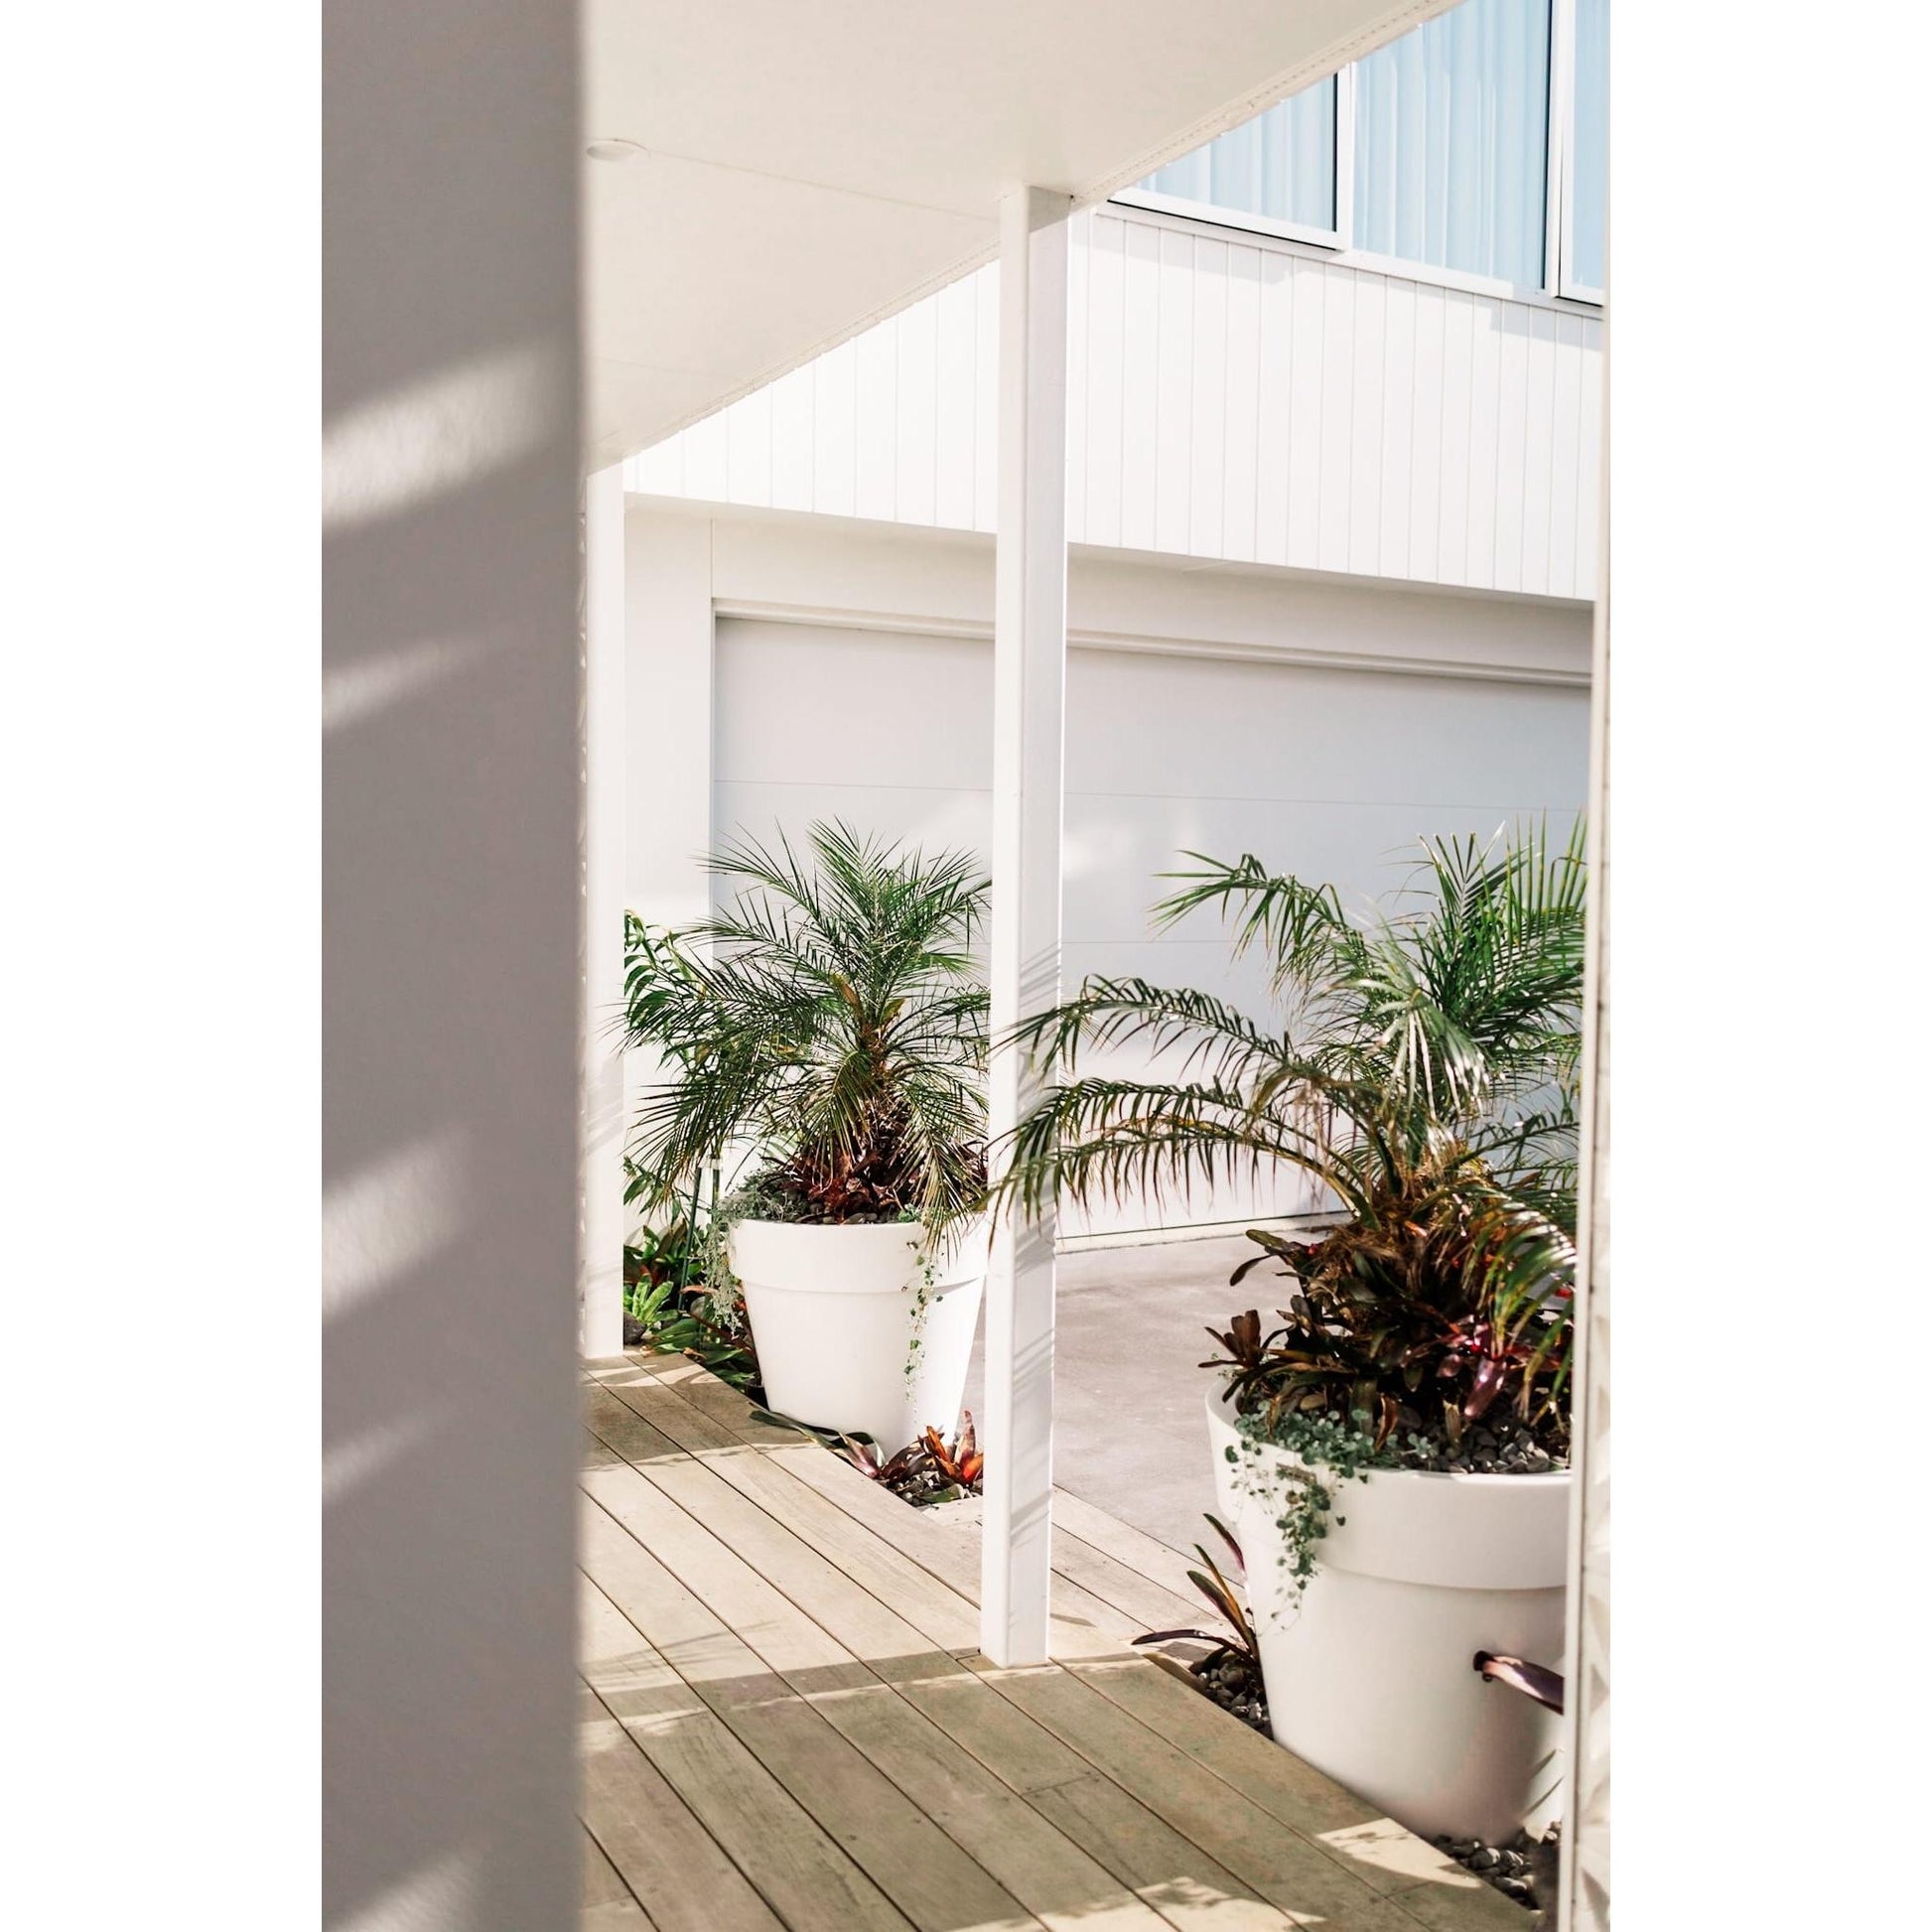 Large white Modscene planter pot in a tropical garden. The planter is planted with a palm tree.